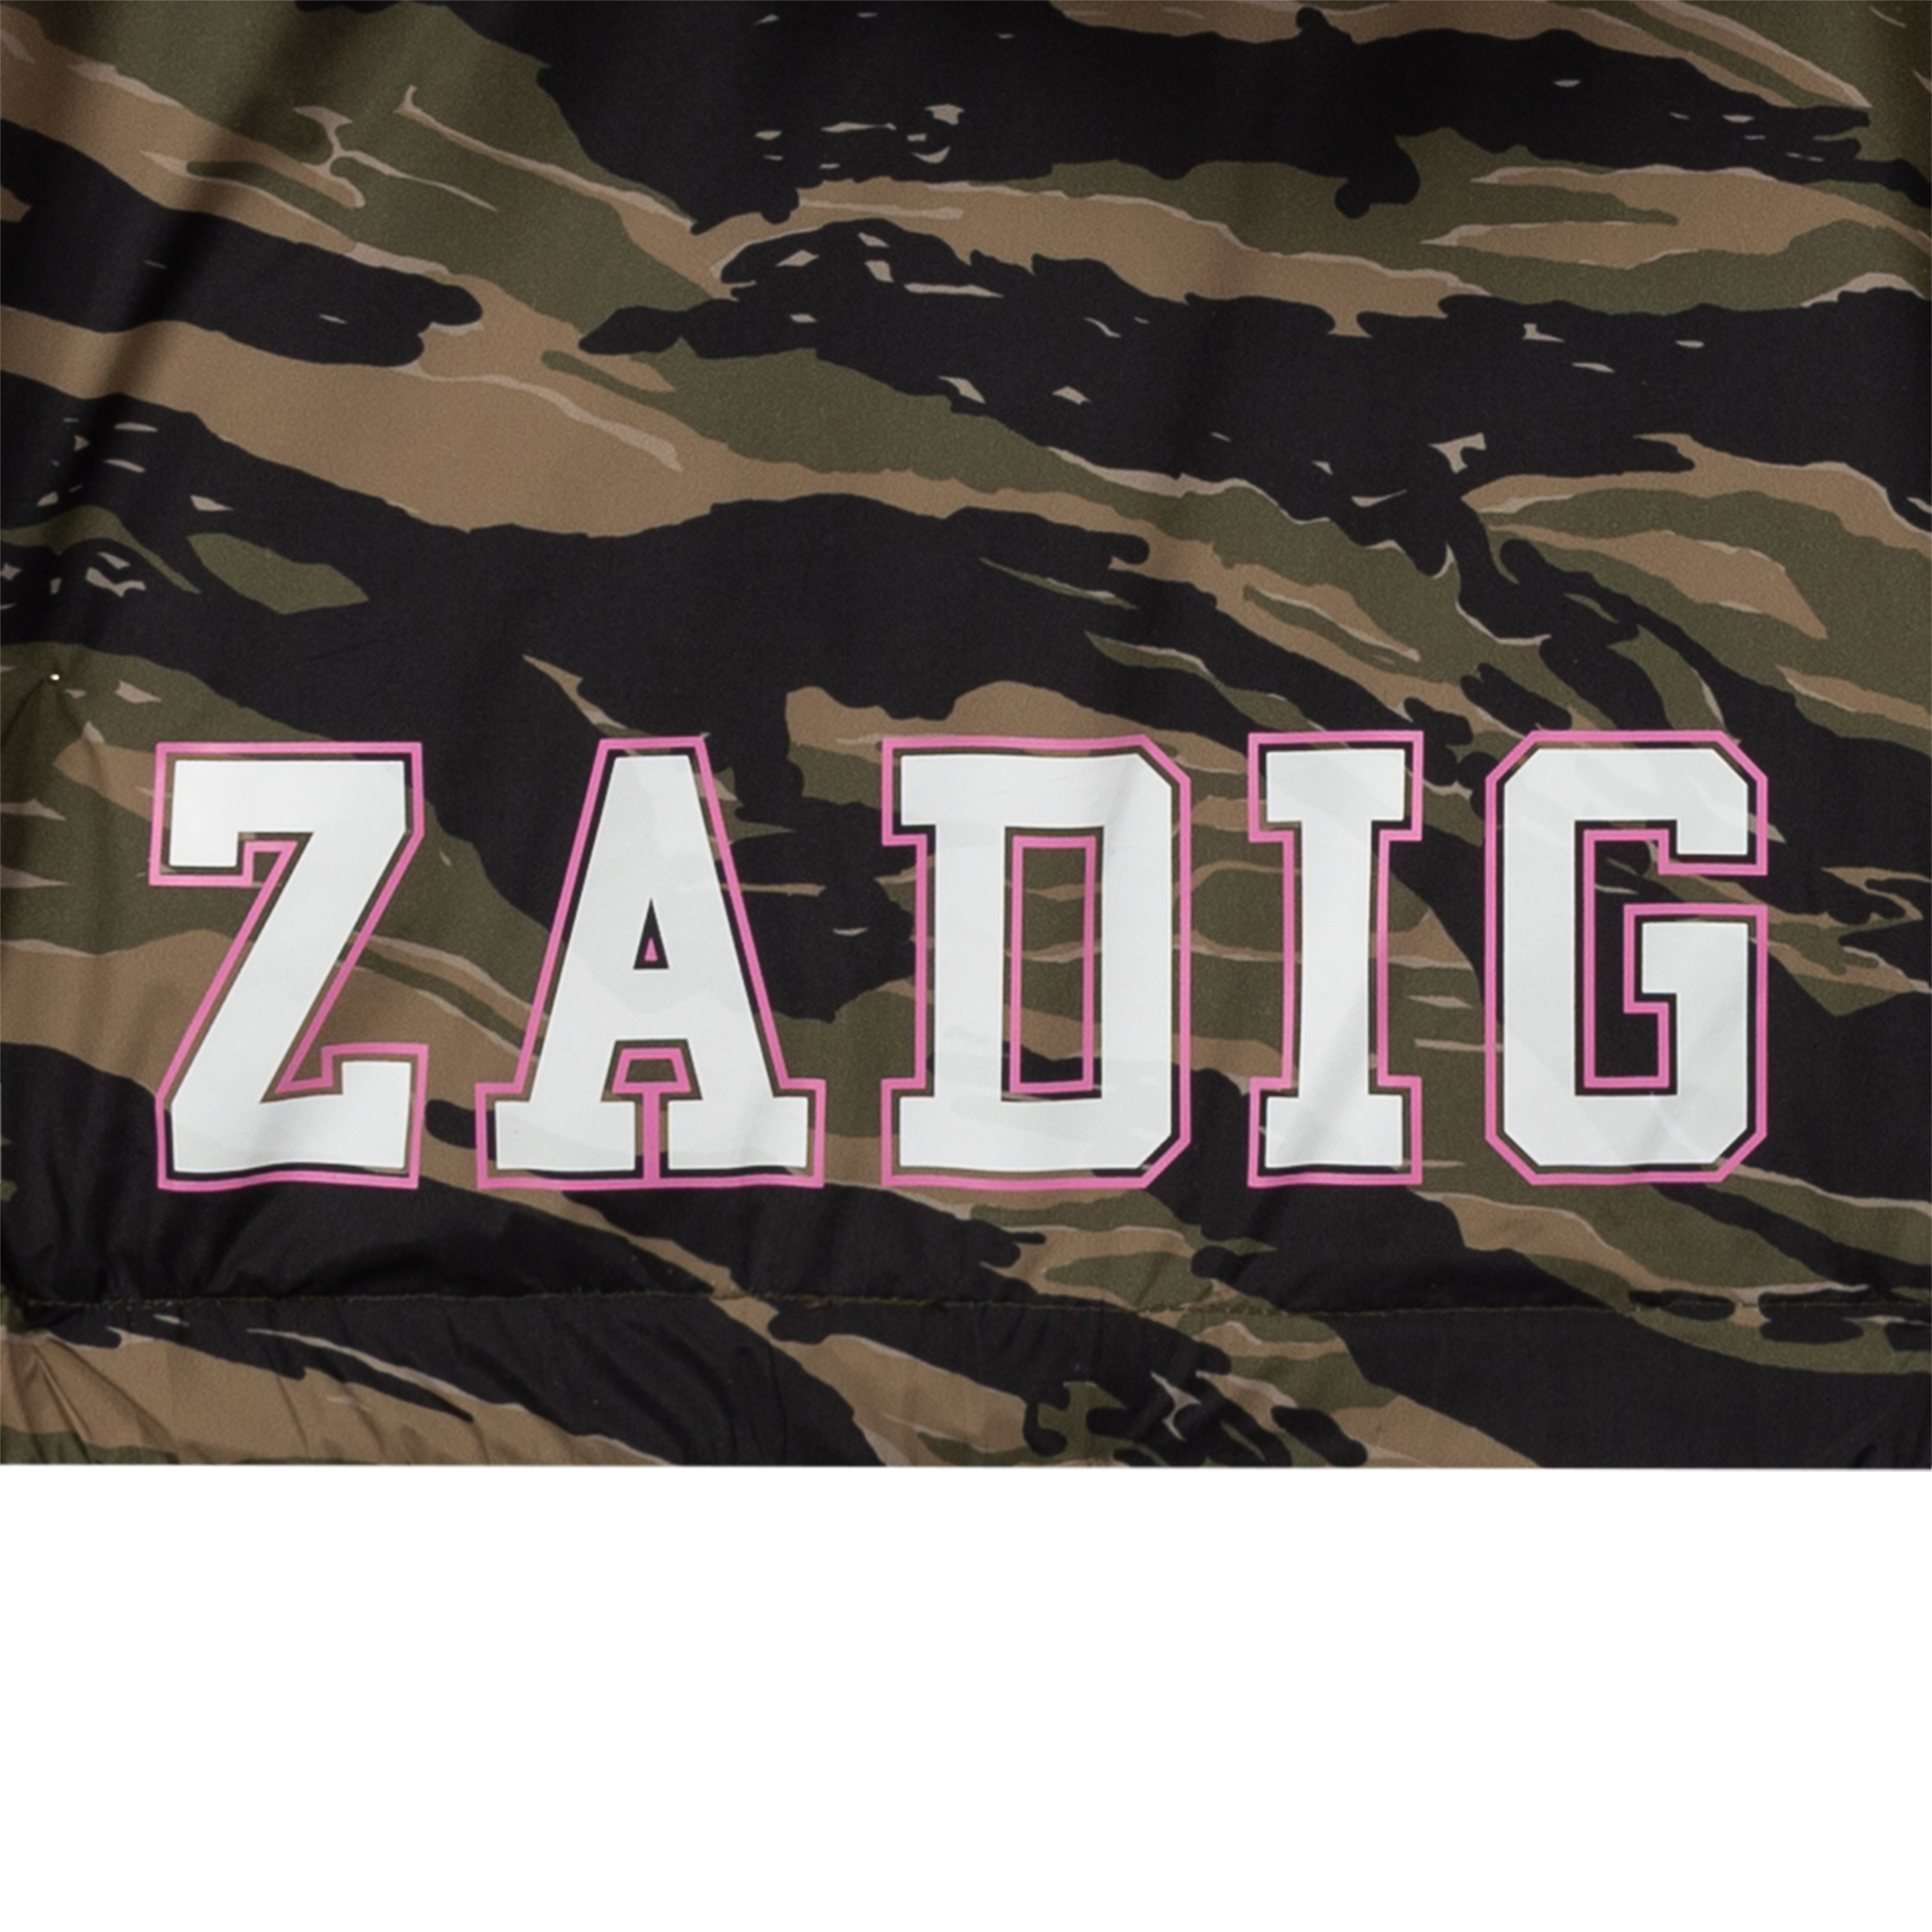 Camouflage-print windcheater ZADIG & VOLTAIRE for GIRL